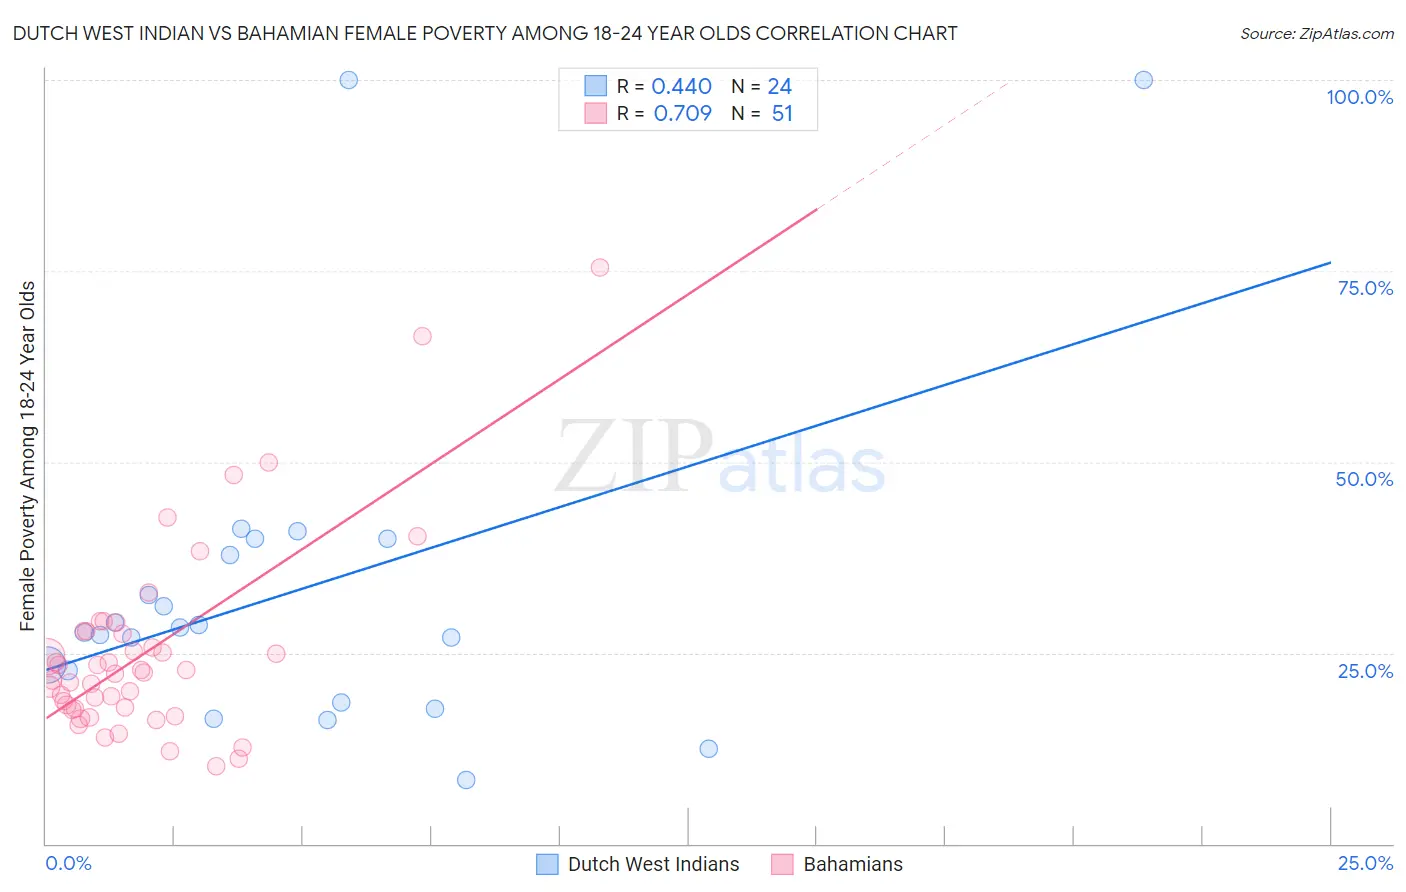 Dutch West Indian vs Bahamian Female Poverty Among 18-24 Year Olds